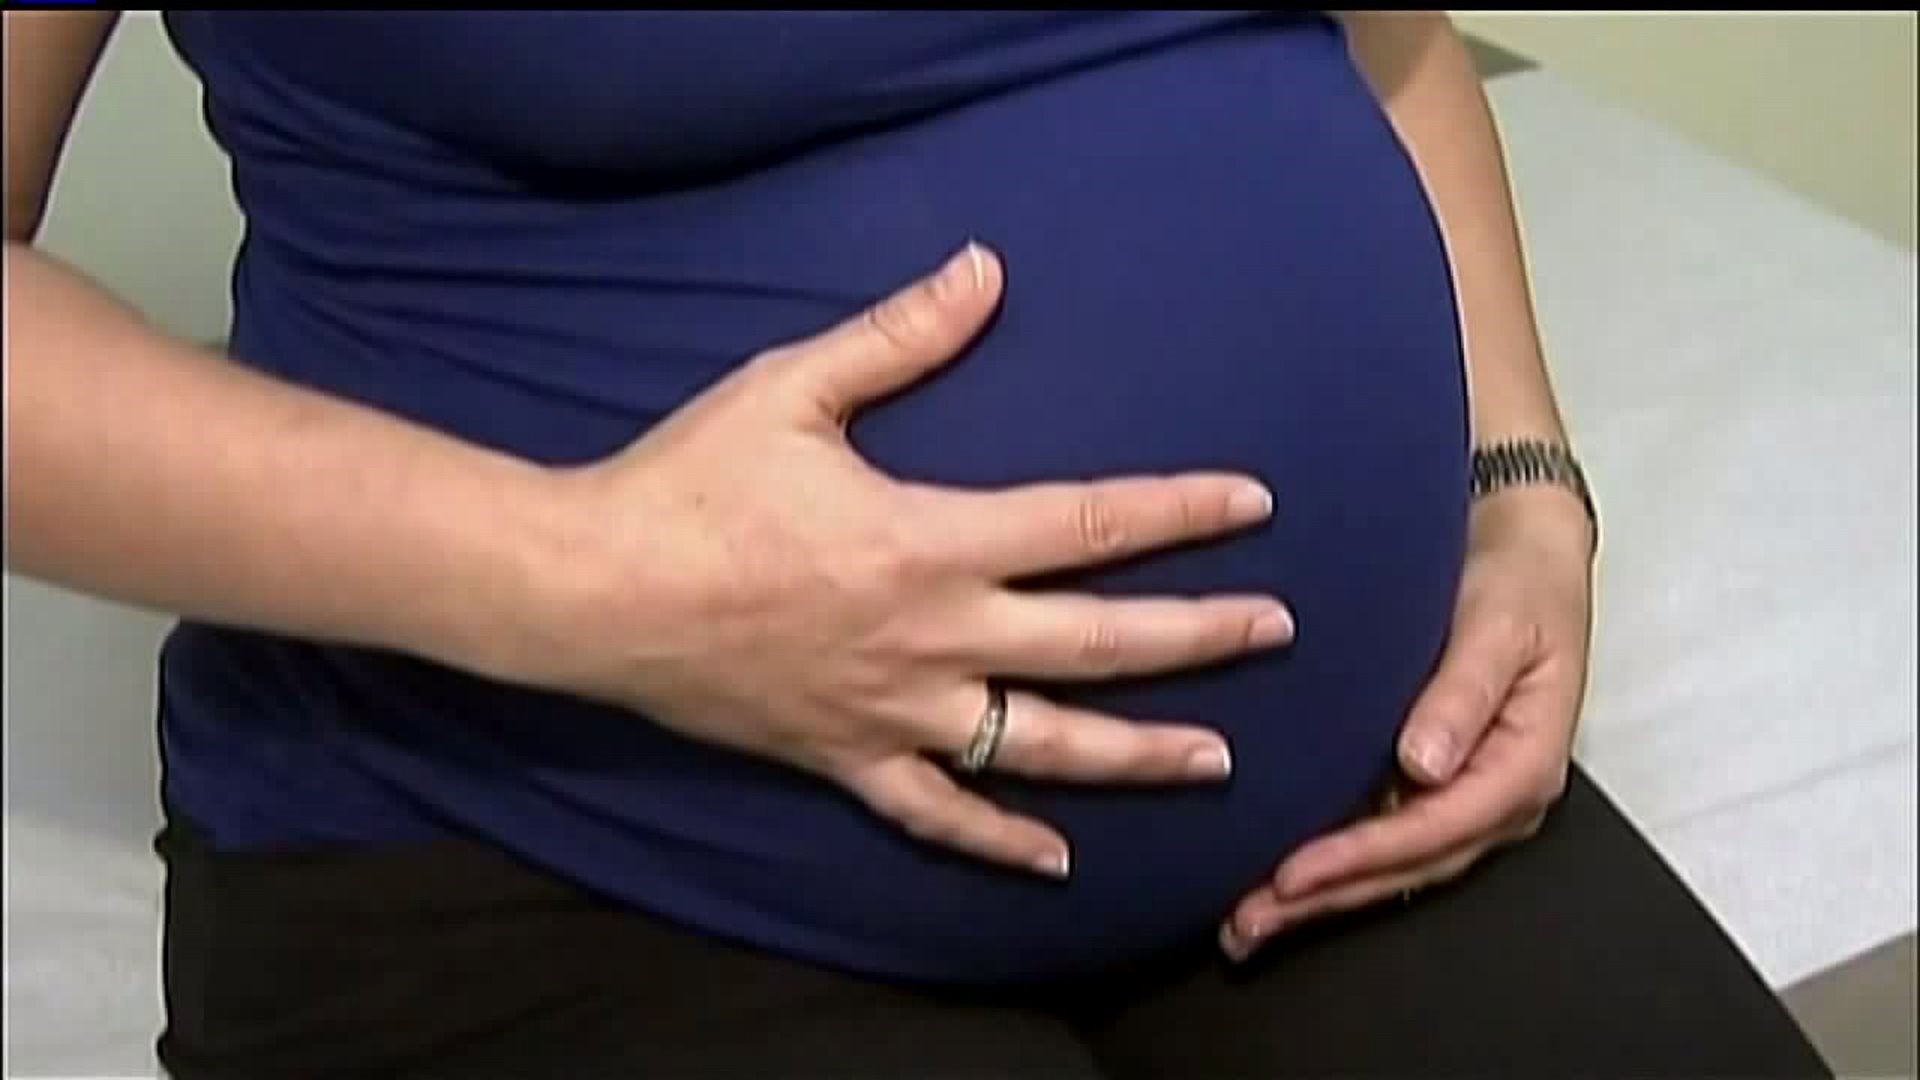 Legislation would investigate deaths of expecting or new mothers